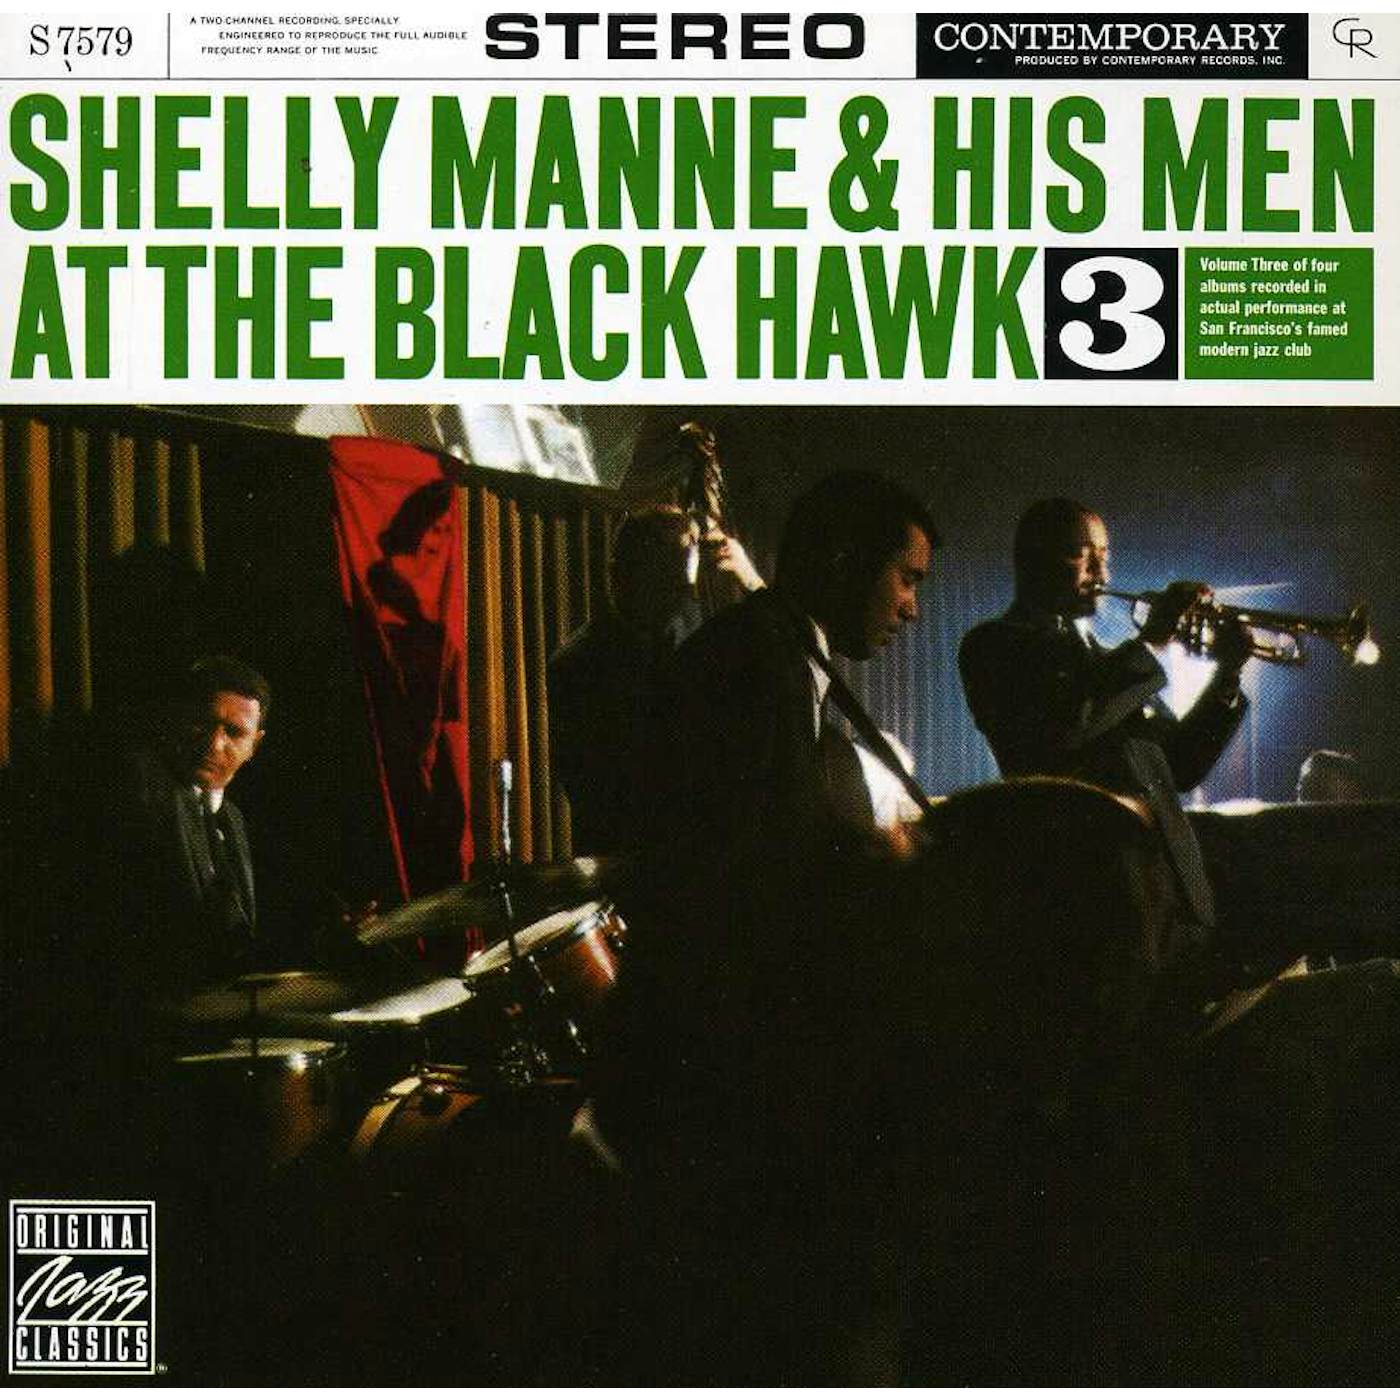 Shelly Manne & His Men LIVE AT THE BLACK HAWK 3 CD